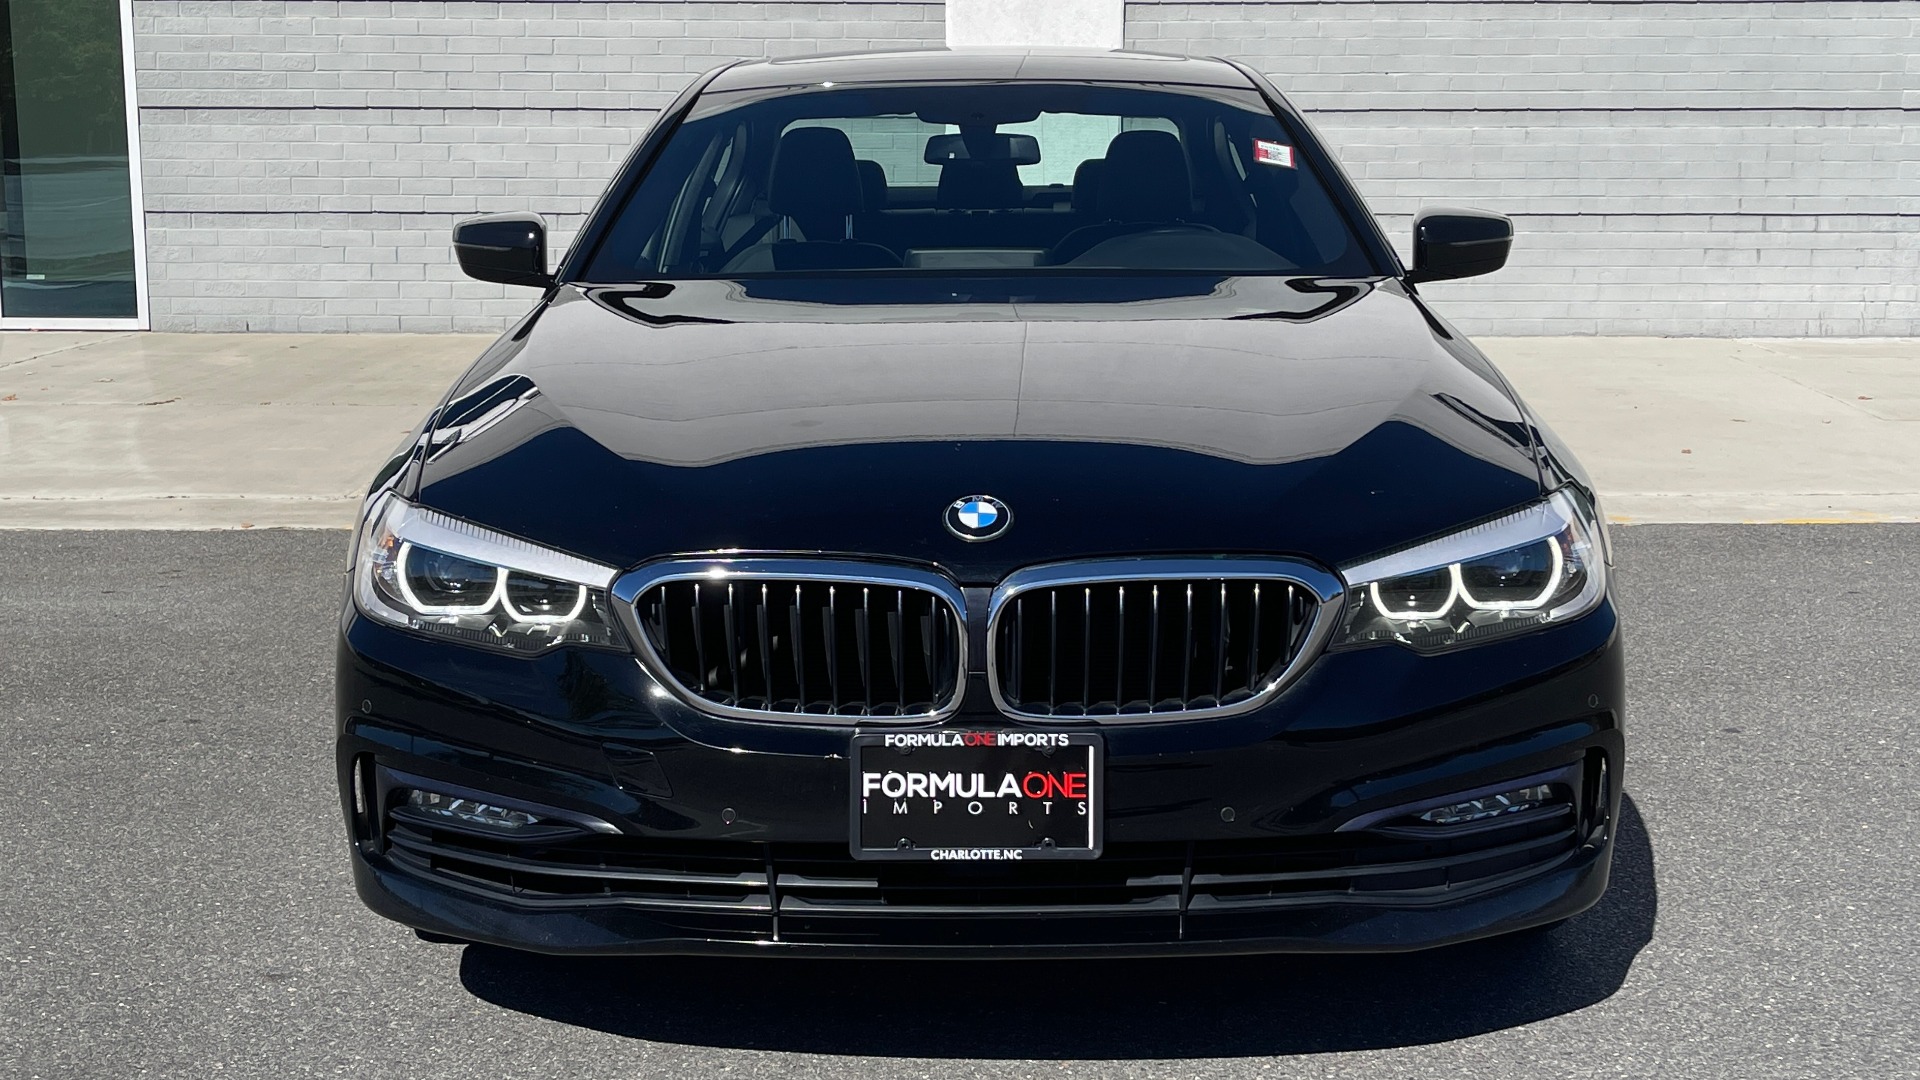 Used 2018 BMW 5 SERIES 530I XDRIVE 2.0L / 8-SPD AUTO / NAV / SUNROOF / REARVIEW for sale Sold at Formula Imports in Charlotte NC 28227 12